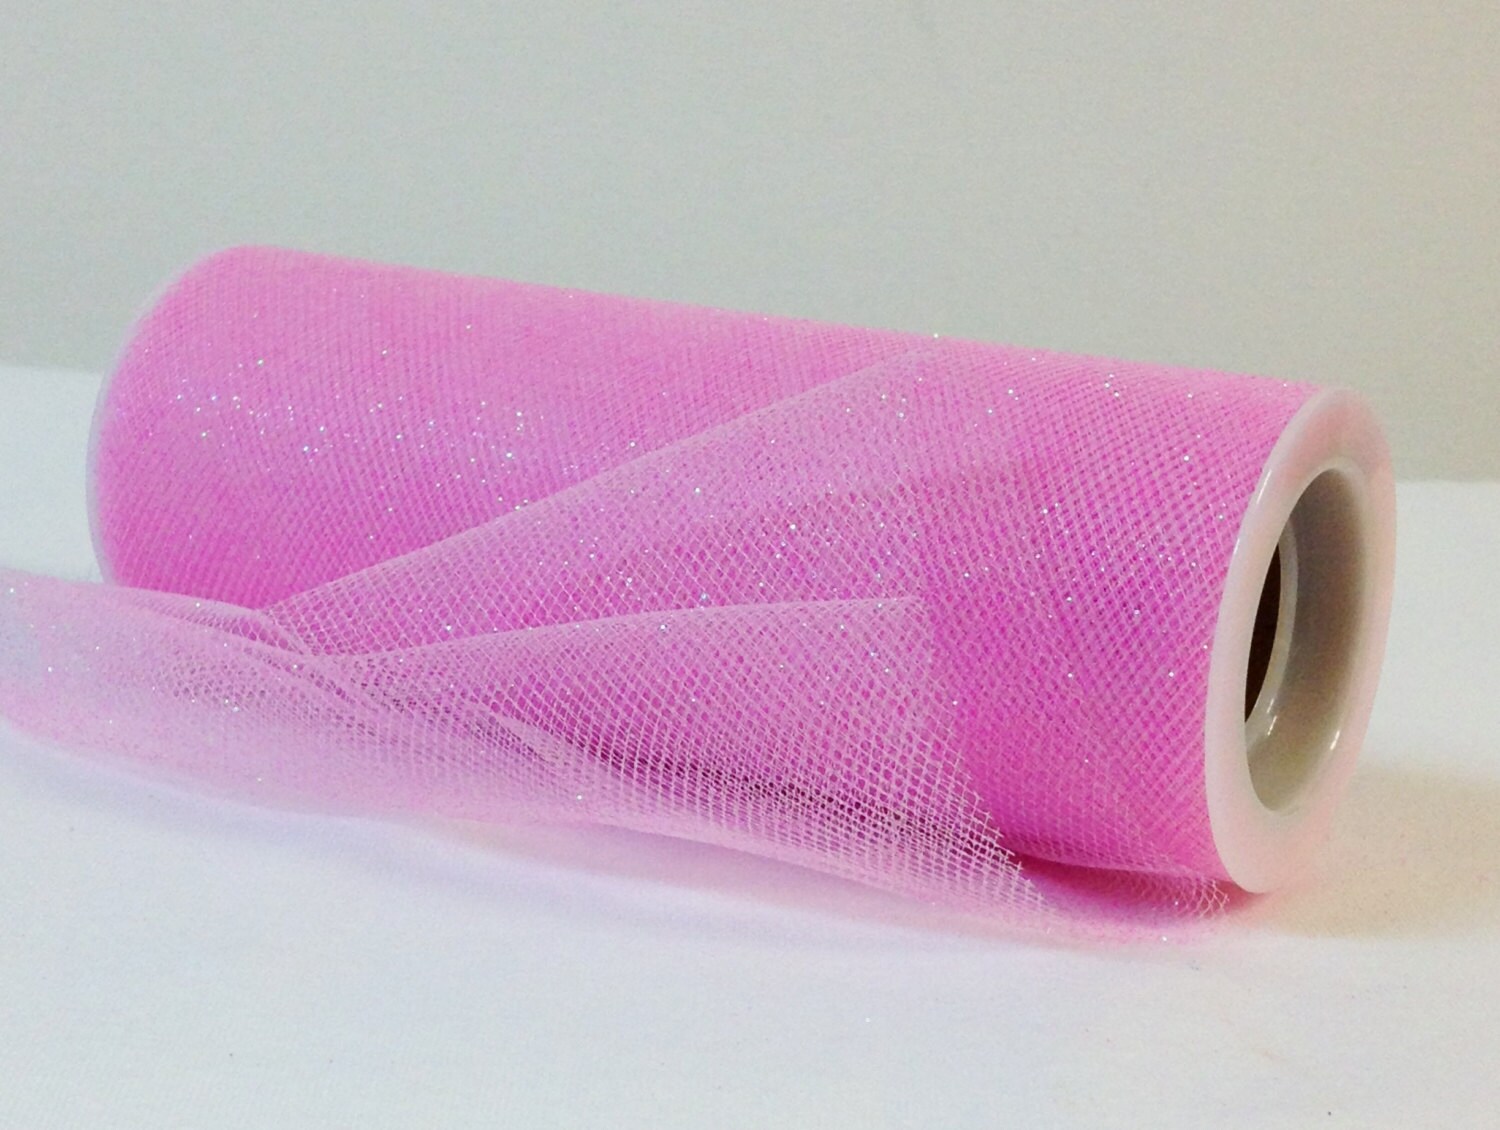 6 Shimmer Tulle Fabric Roll For Crafts, Wedding, Pary Decorations, Gifts -  Fuchsia 100 Yards 